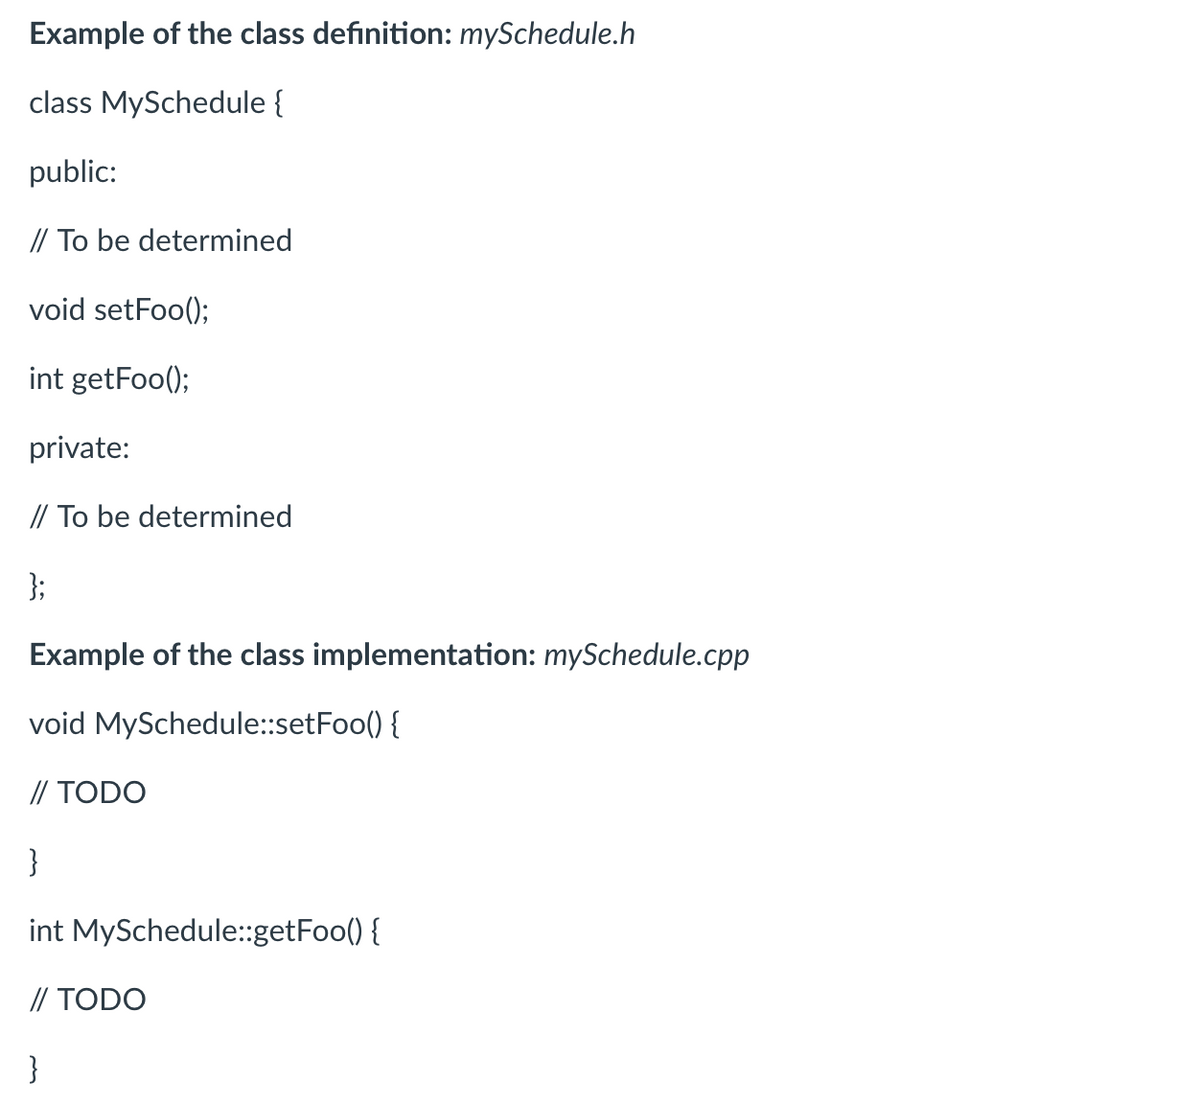 Example of the class definition: mySchedule.h
class MySchedule {
public:
// To be determined
void setFoo();
int getFoo();
private:
// To be determined
};
Example of the class implementation: mySchedule.cpp
void MySchedule::setFoo() {
// TODO
}
int MySchedule::getFoo() {
// TODO
}